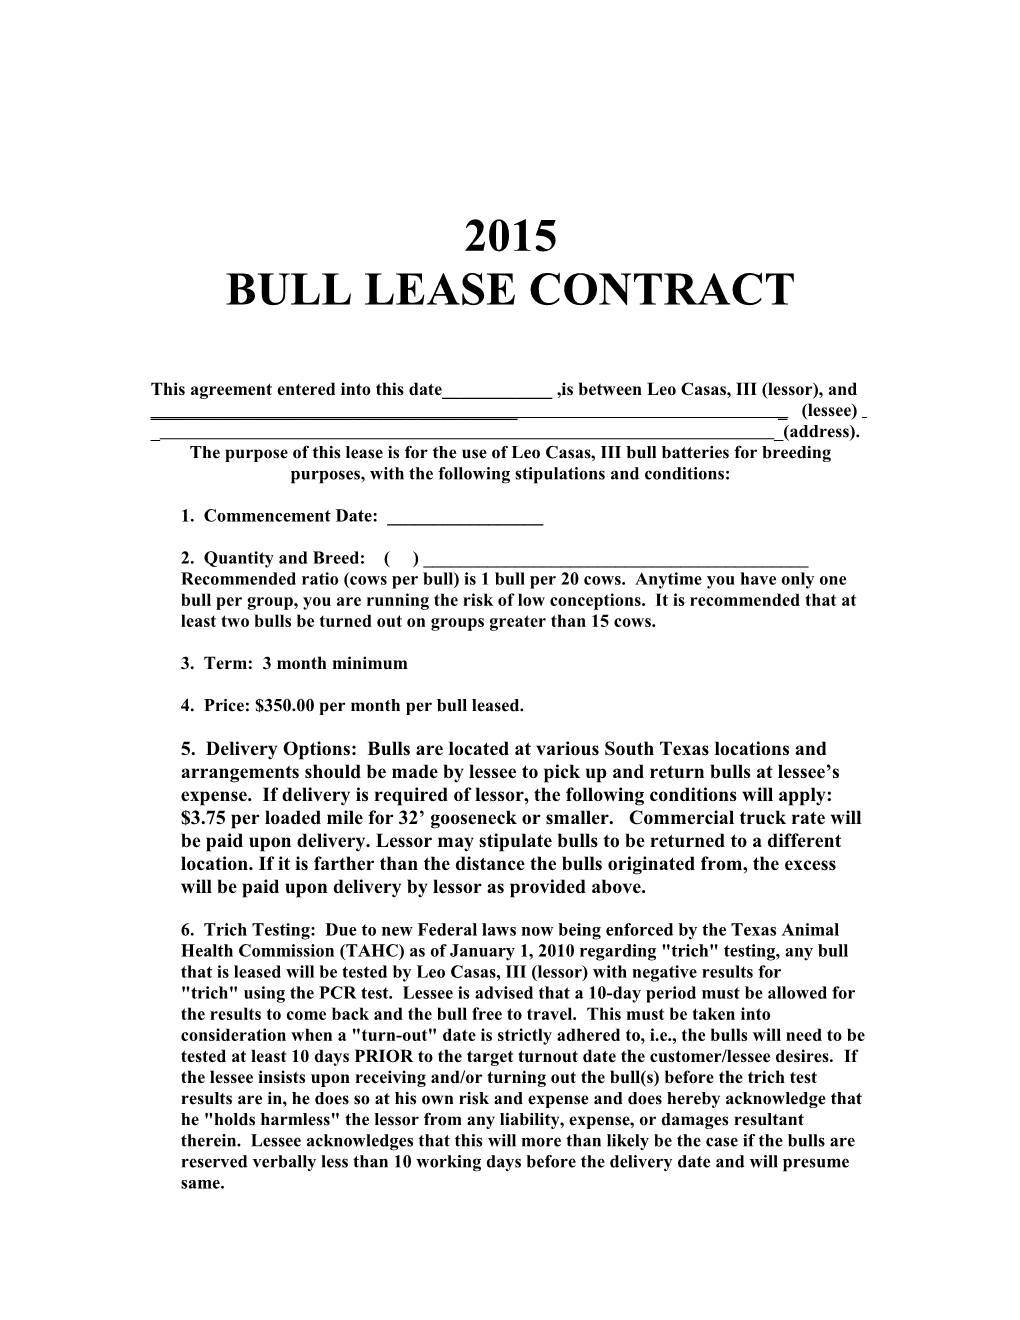 Bull Lease Contract